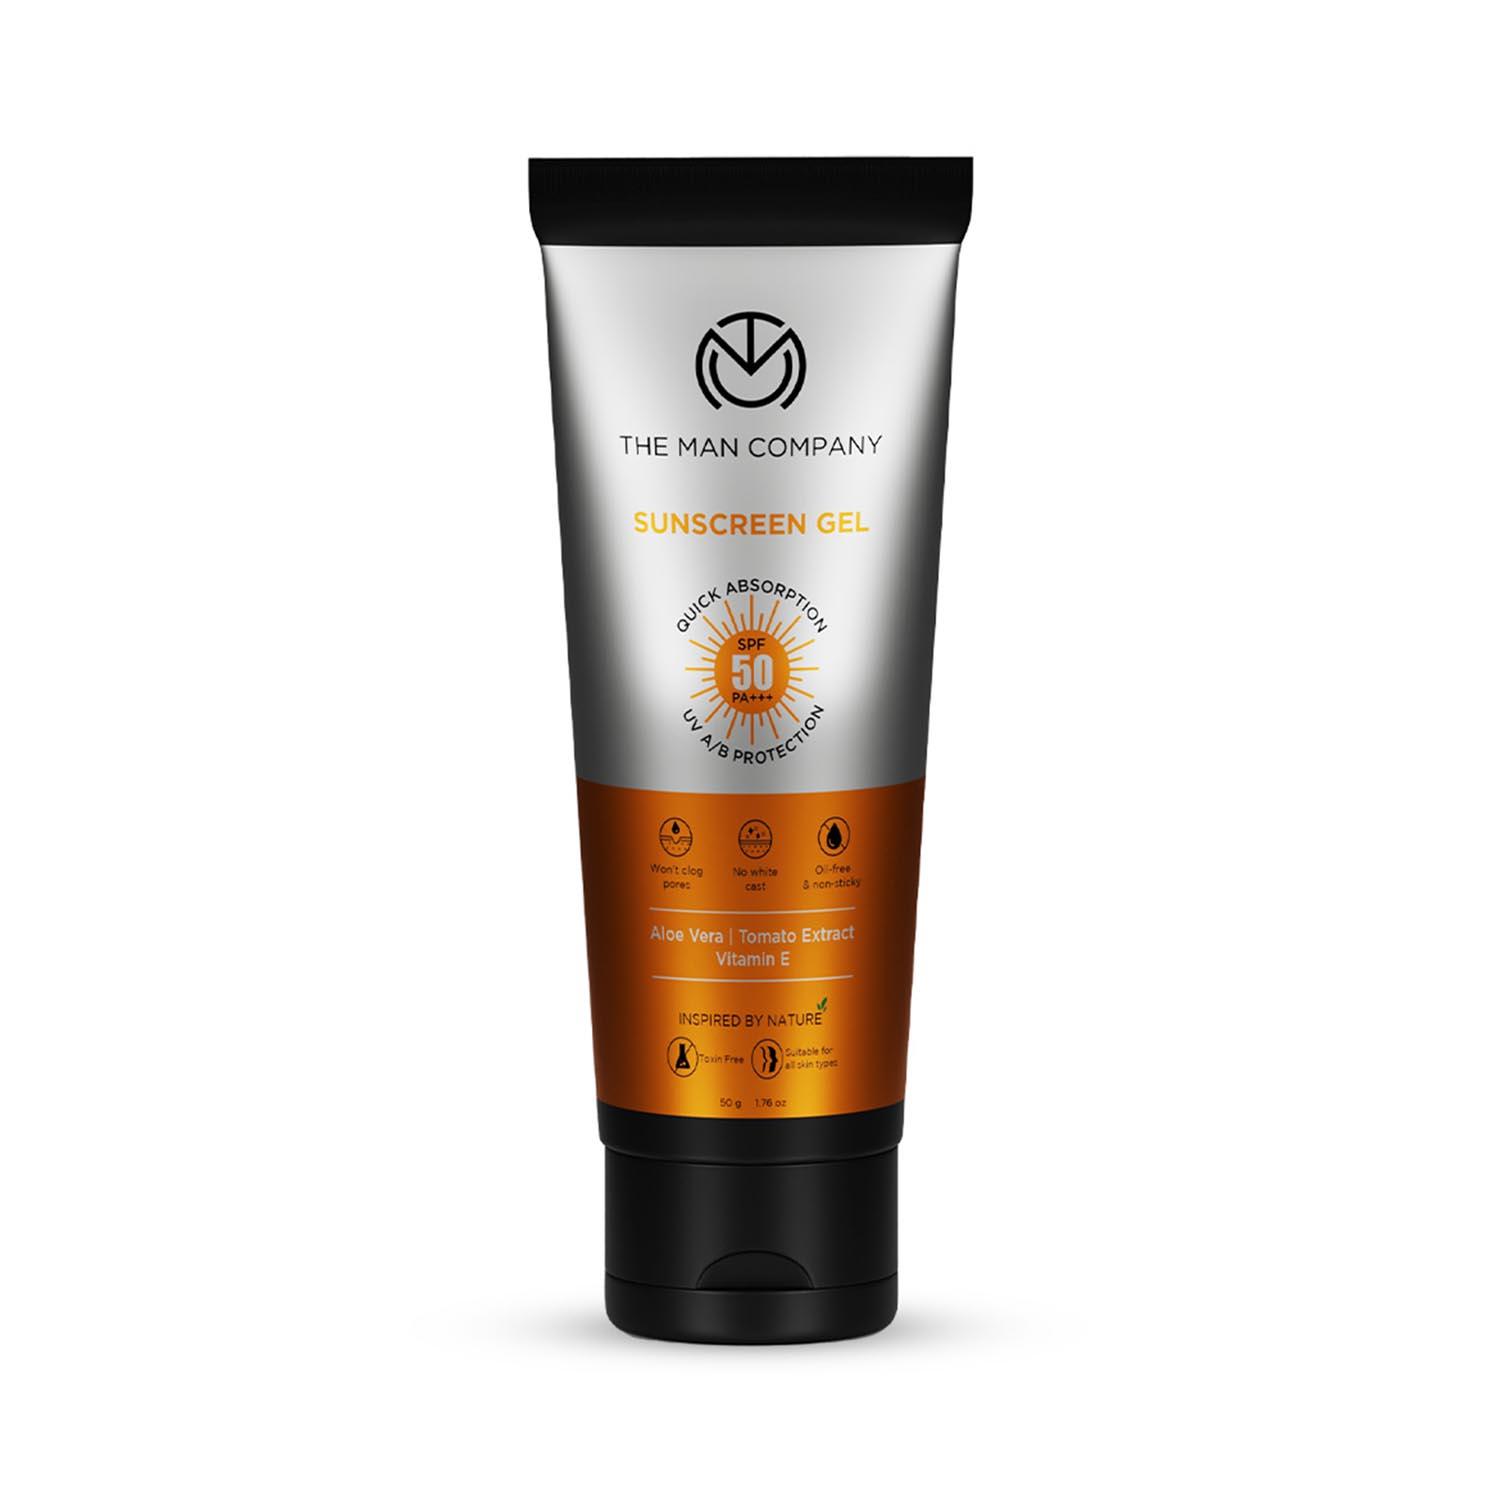 The Man Company | The Man Company Oil-Free Sunscreen Gel SPF 50 PA+++ For Men- (50 g)